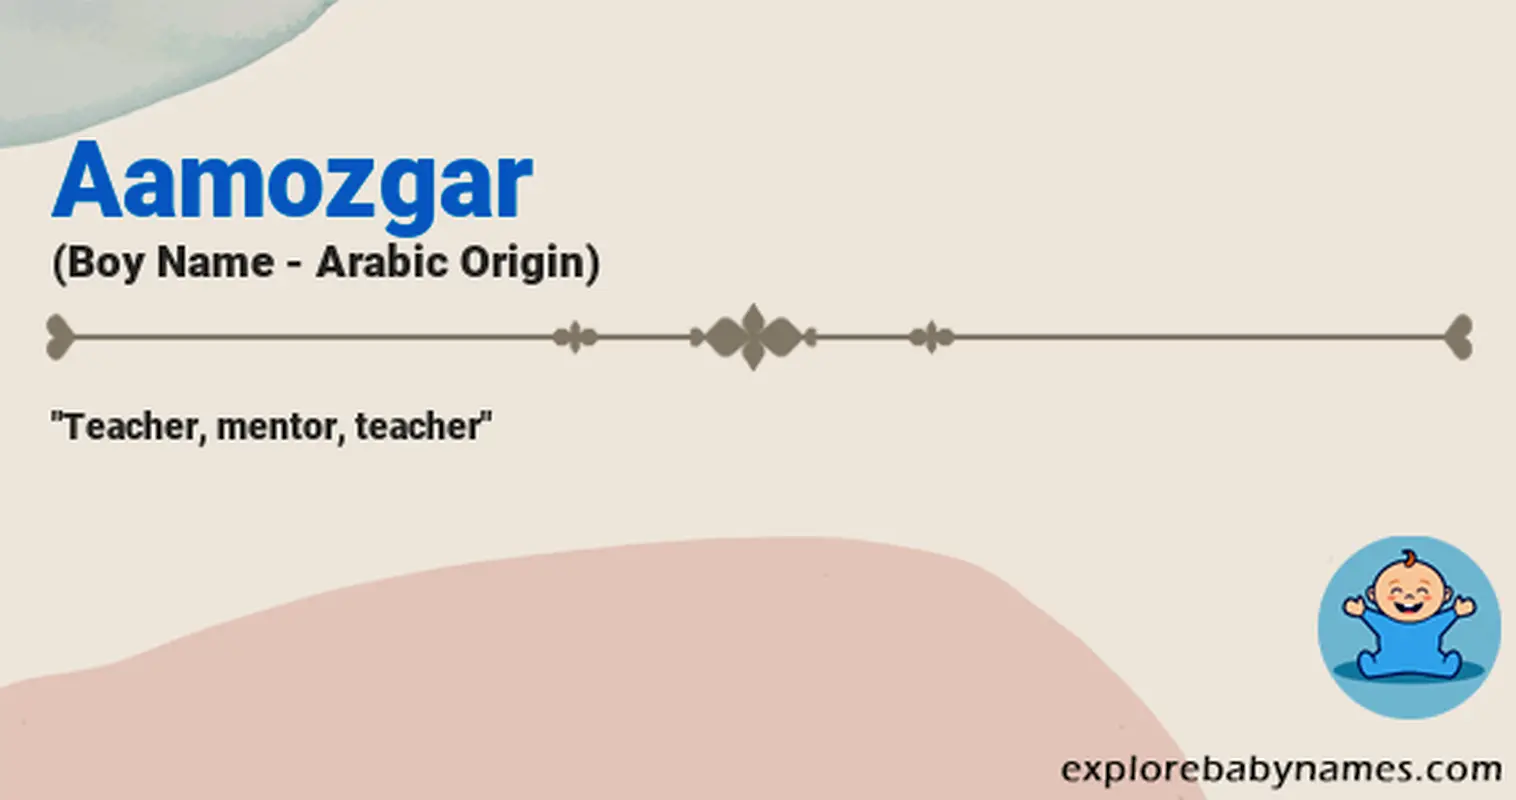 Meaning of Aamozgar